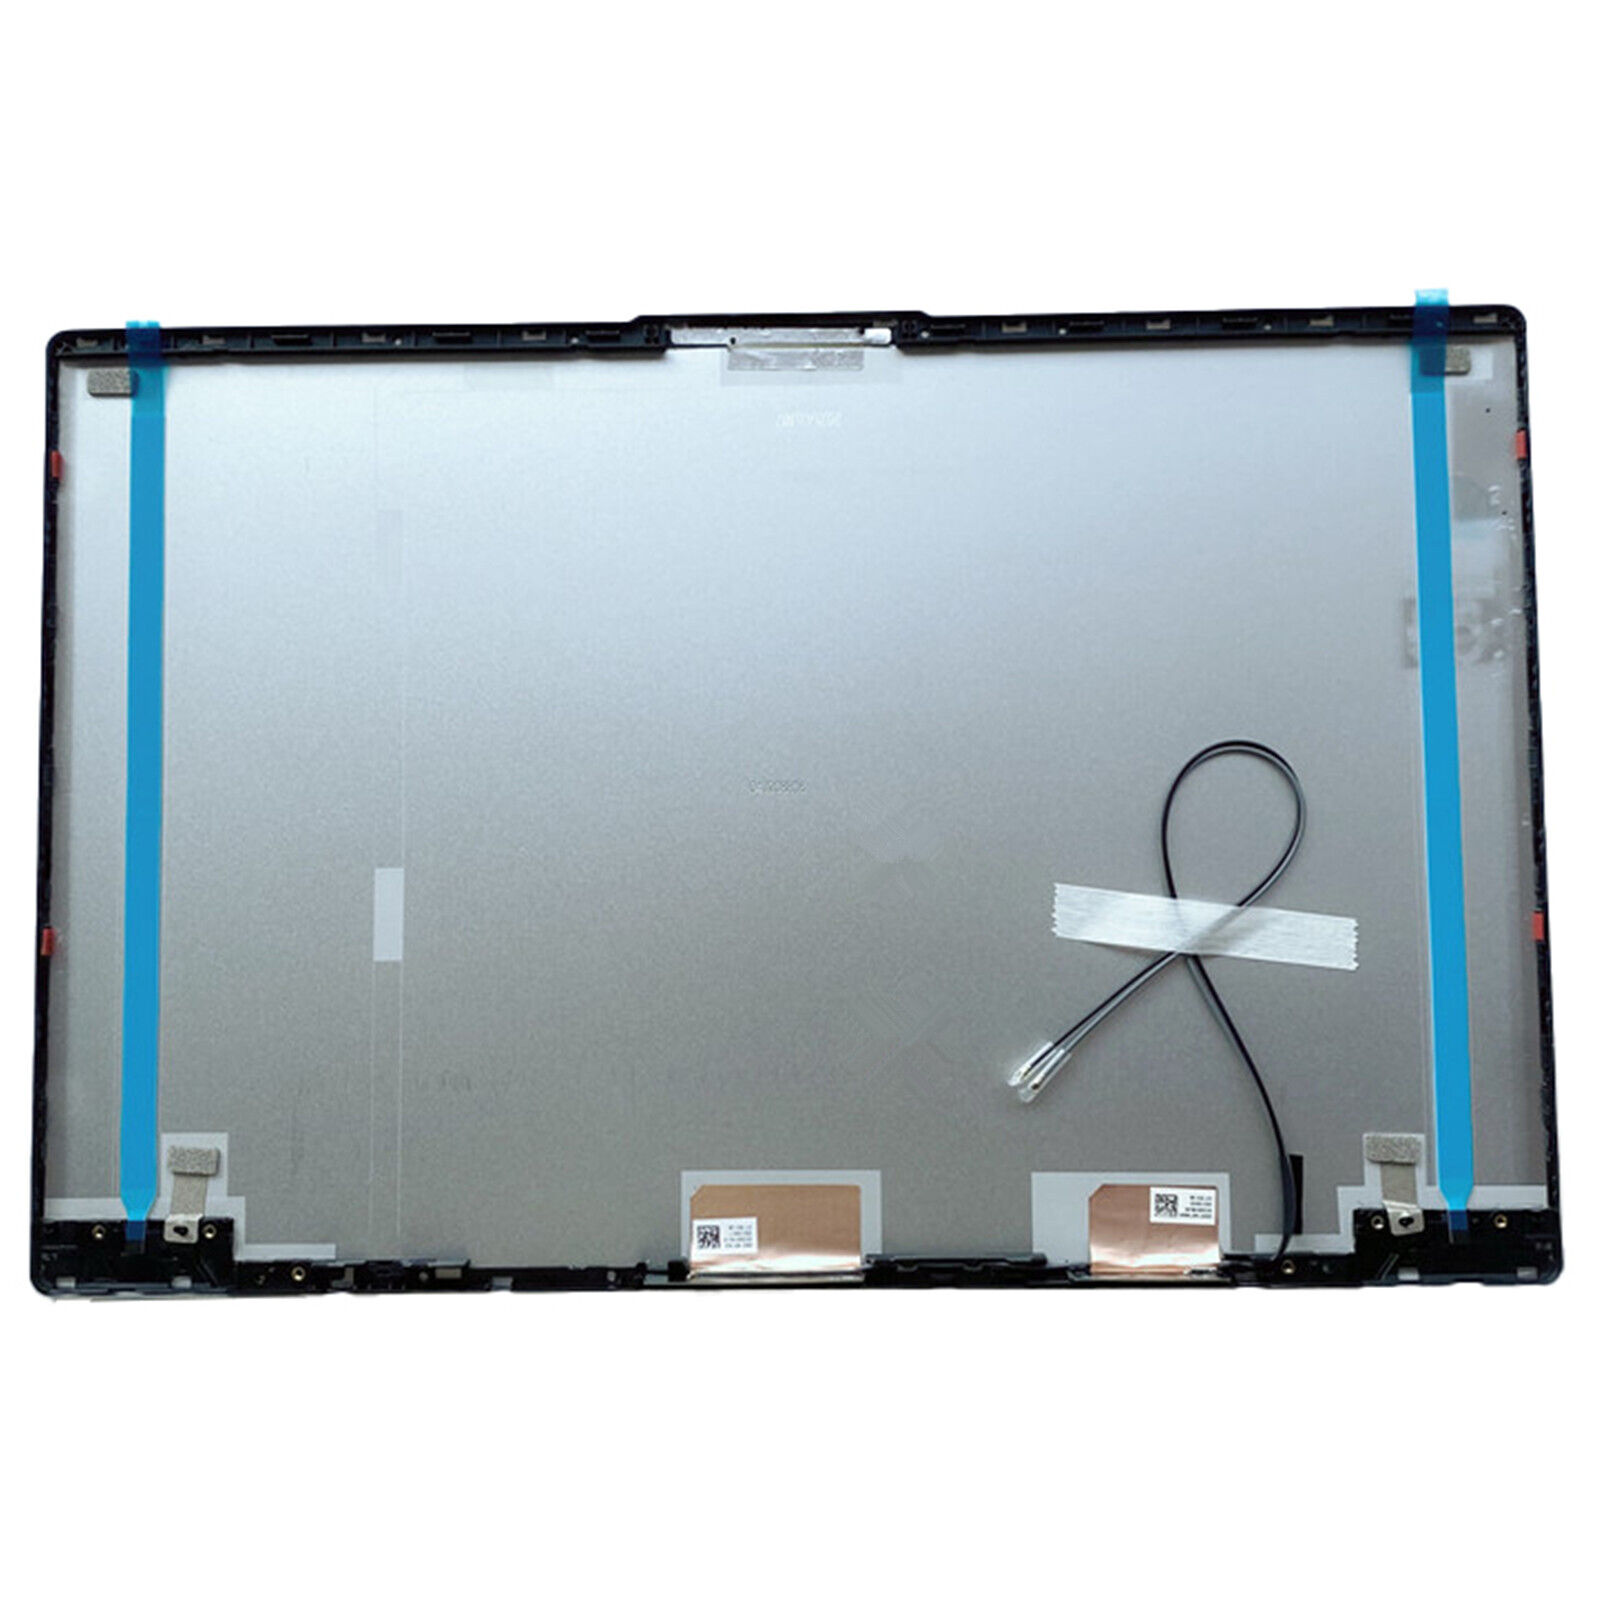 Lcd Back Cover For Lenovo ideapad 5 15IIL05 15ITL05 15ARE05 Top Lid 5CB0X56071